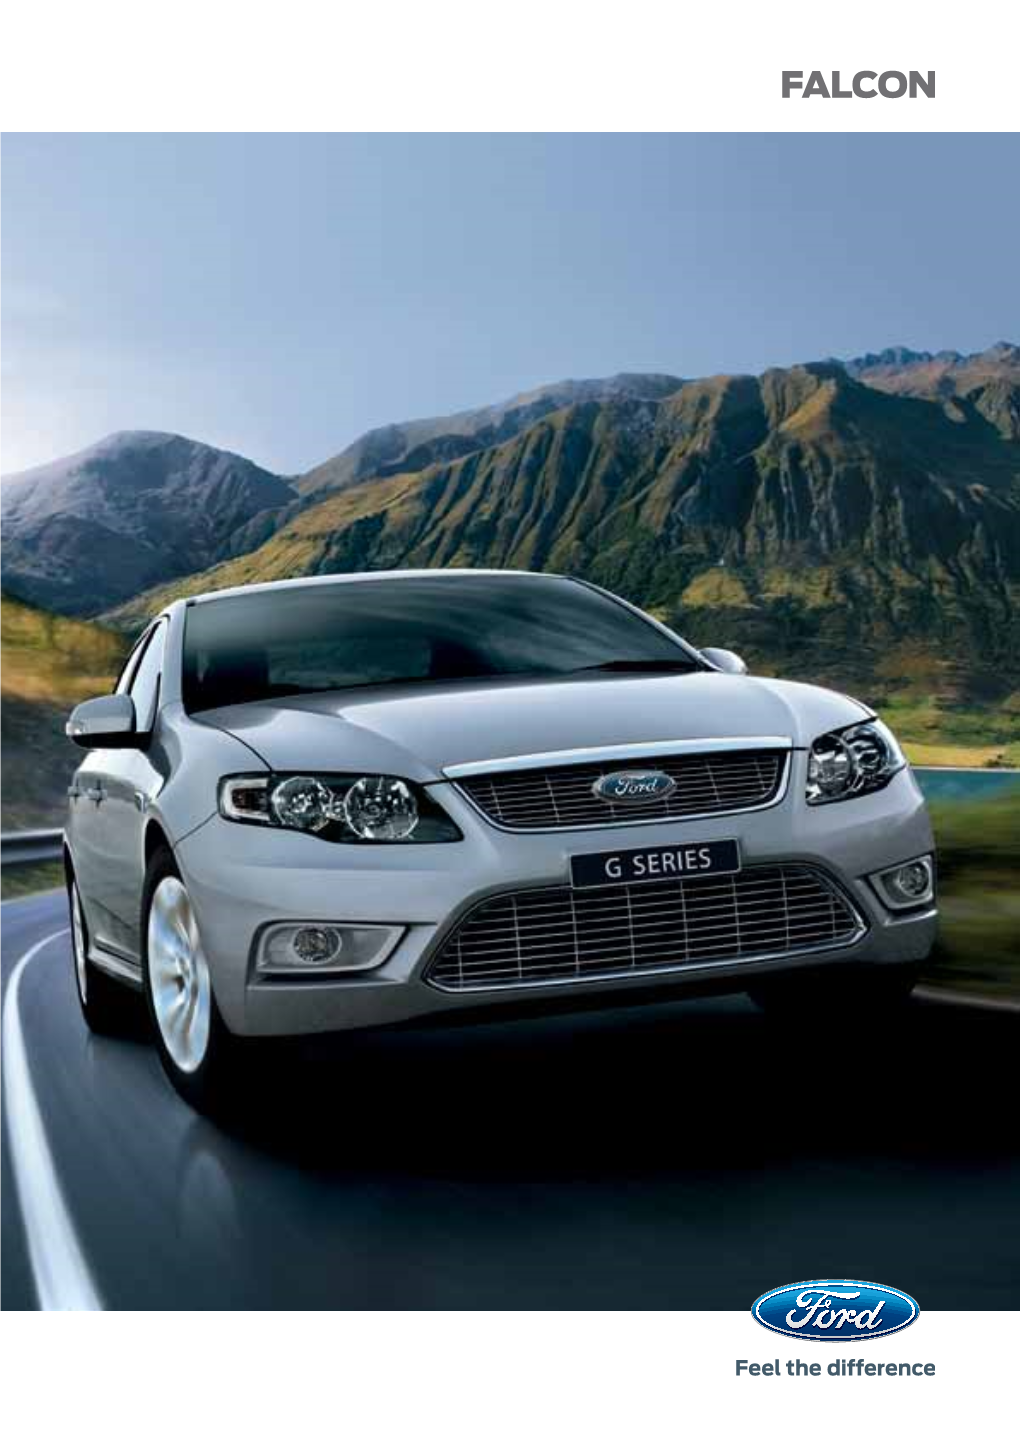 FALCON Ford Falcon the Falcon Perfectly Blends a Spirited Driving Experience with Levels of Luxury and Comfort You’D Expect to Find in More Expensive European Marques